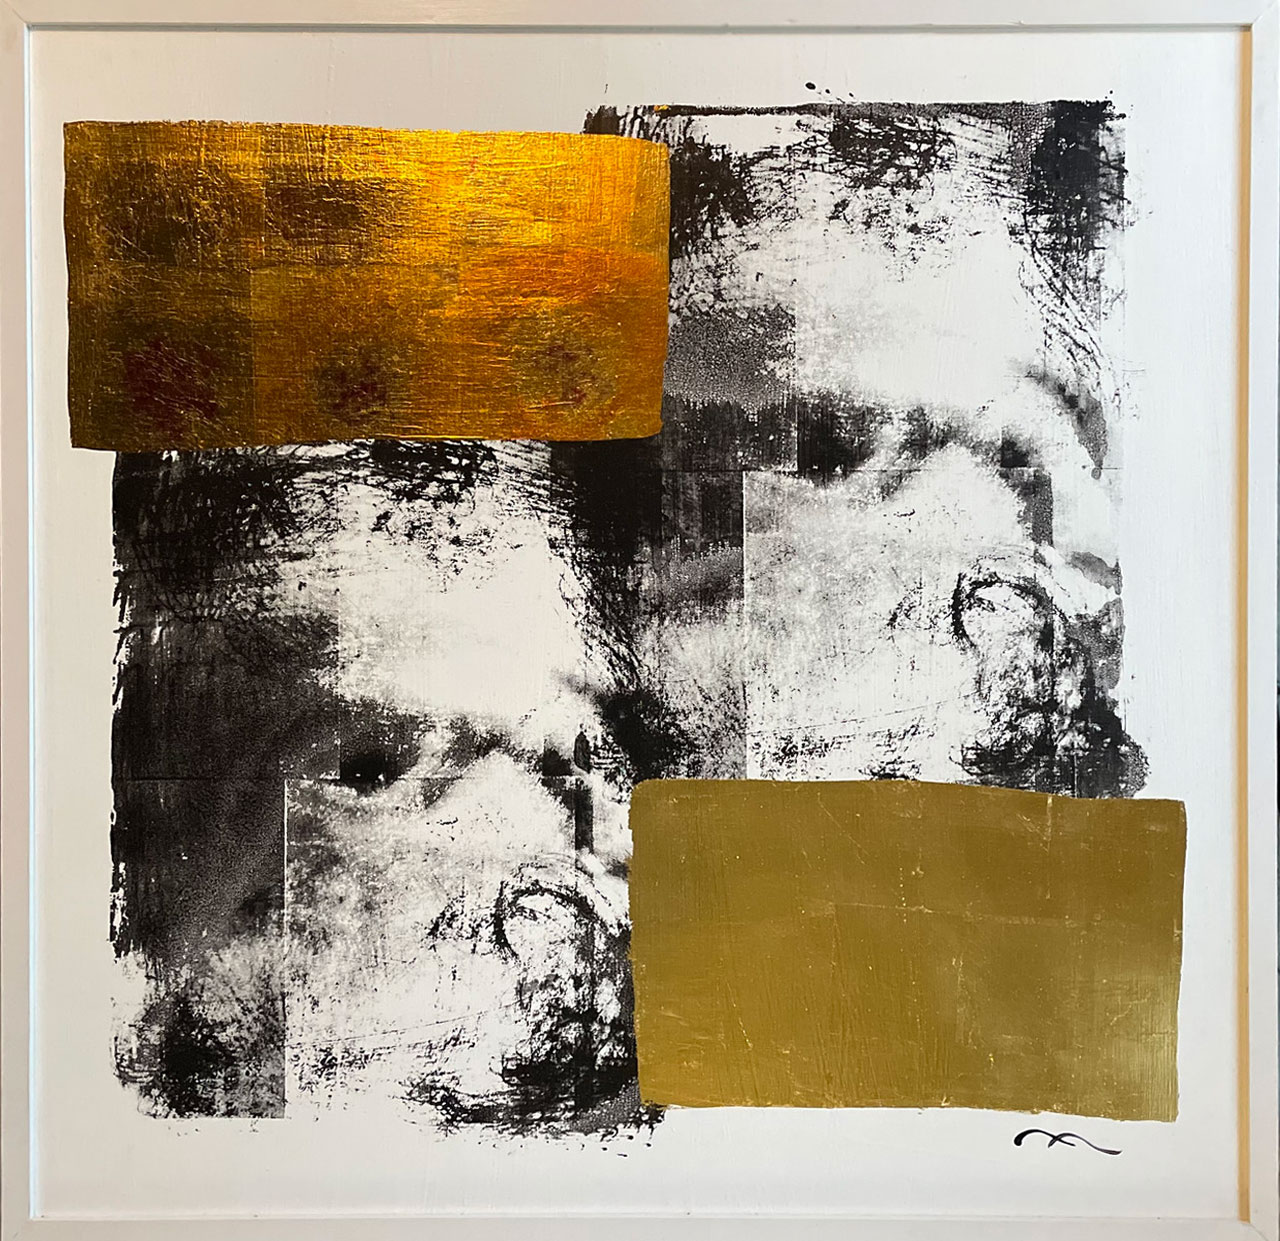 Smith’s silkscreens begin with photographs of the human face, abstracting the images with paint and gilding to evoke the complexity and universality of human emotion.